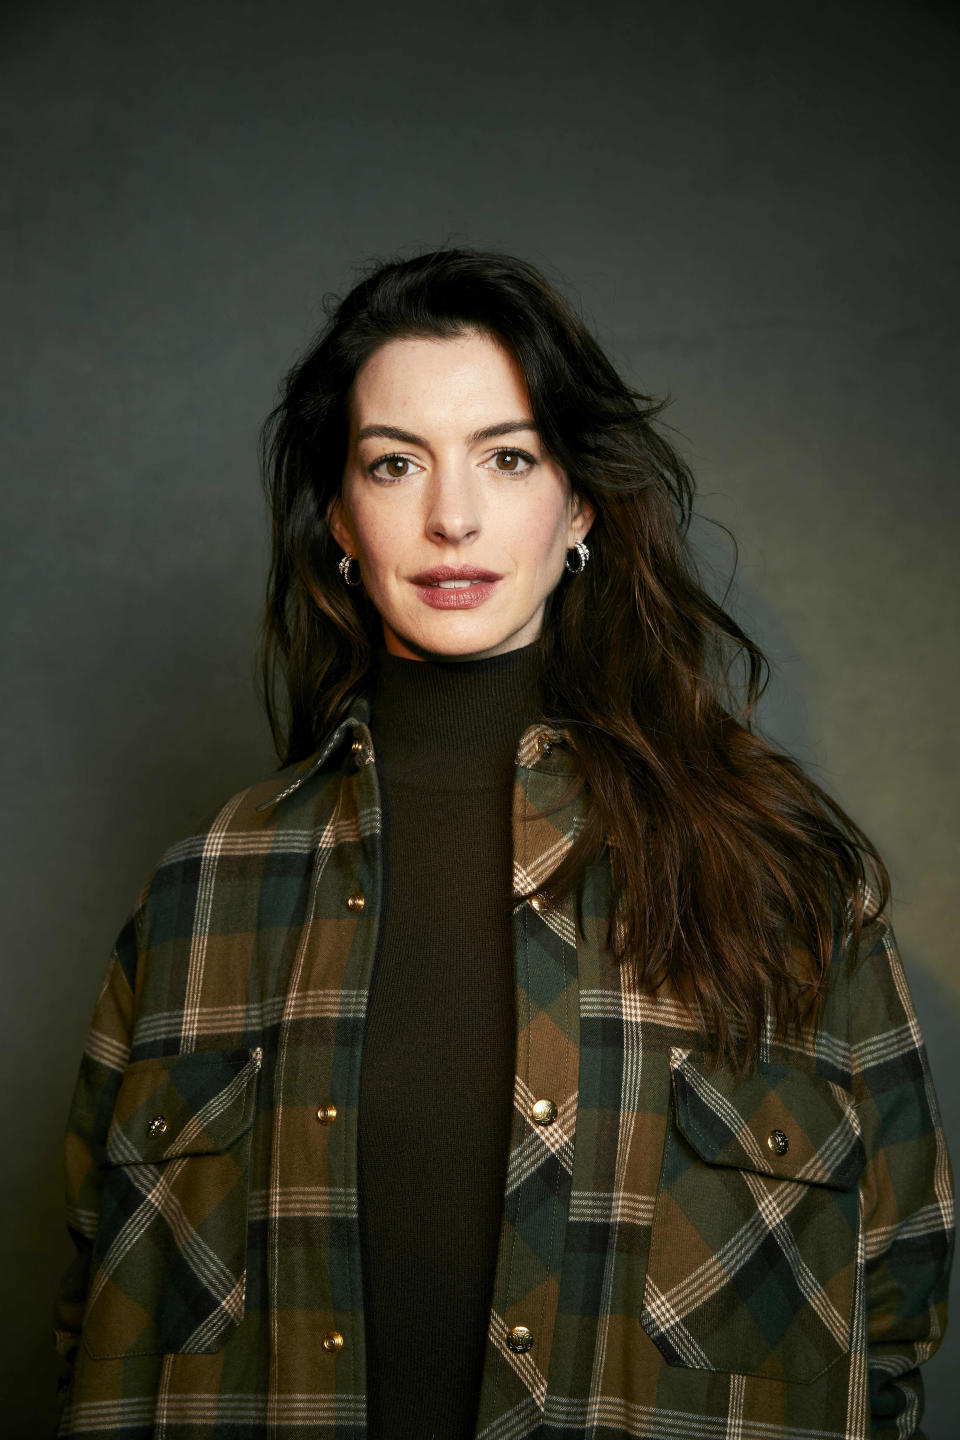 Anne Hathaway poses for a portrait to promote the film "Eileen" at the Latinx House during the Sundance Film Festival on Saturday, Jan. 21, 2023, in Park City, Utah. (Photo by Taylor Jewell/Invision/AP)